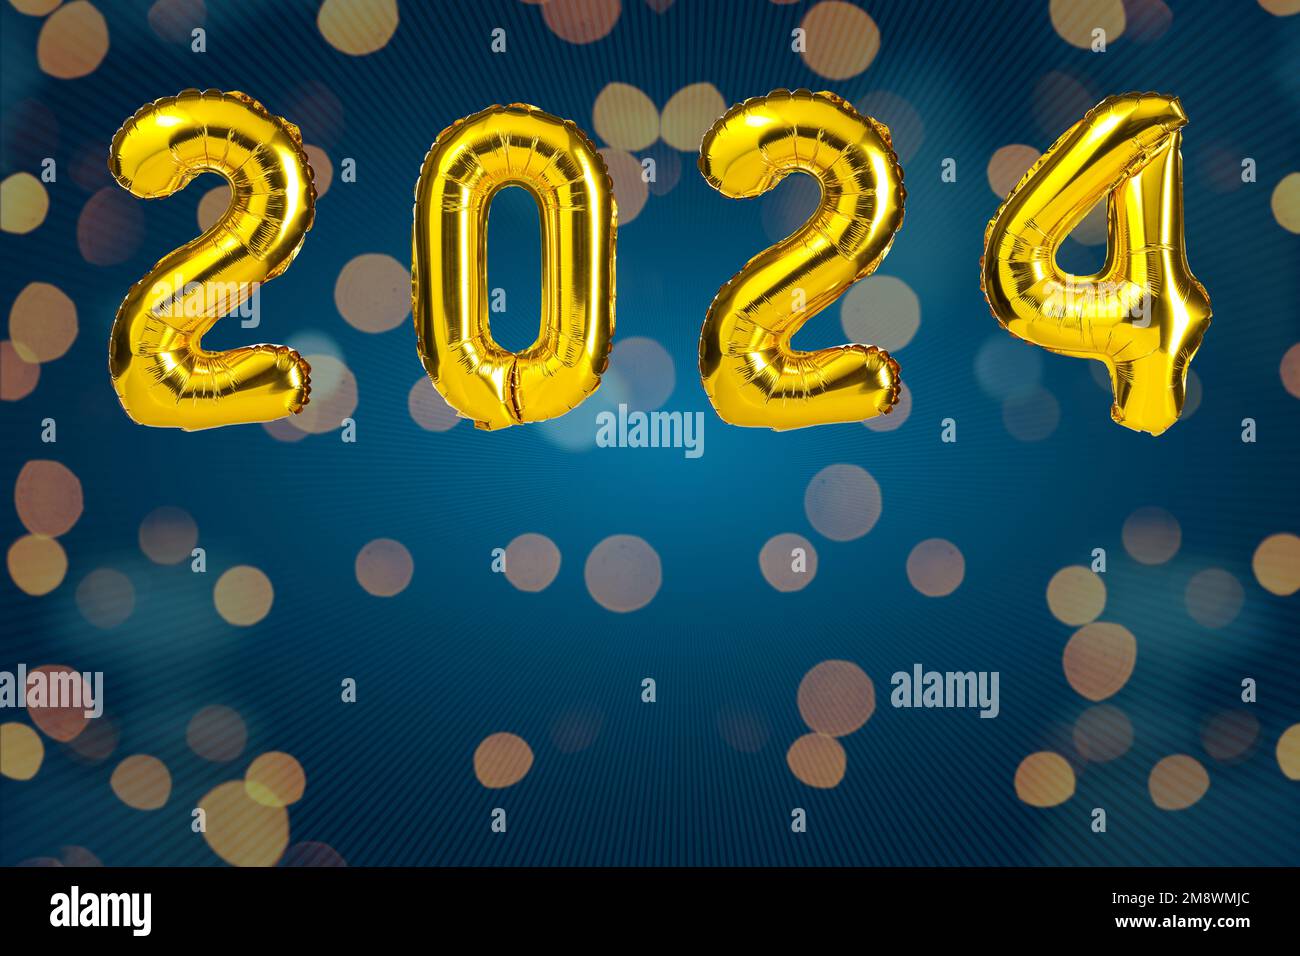 New Year 2024 Celebration Golden Yellow Foil Color Balloons 2024 Balloons On Blue Background 2M8WMJC 